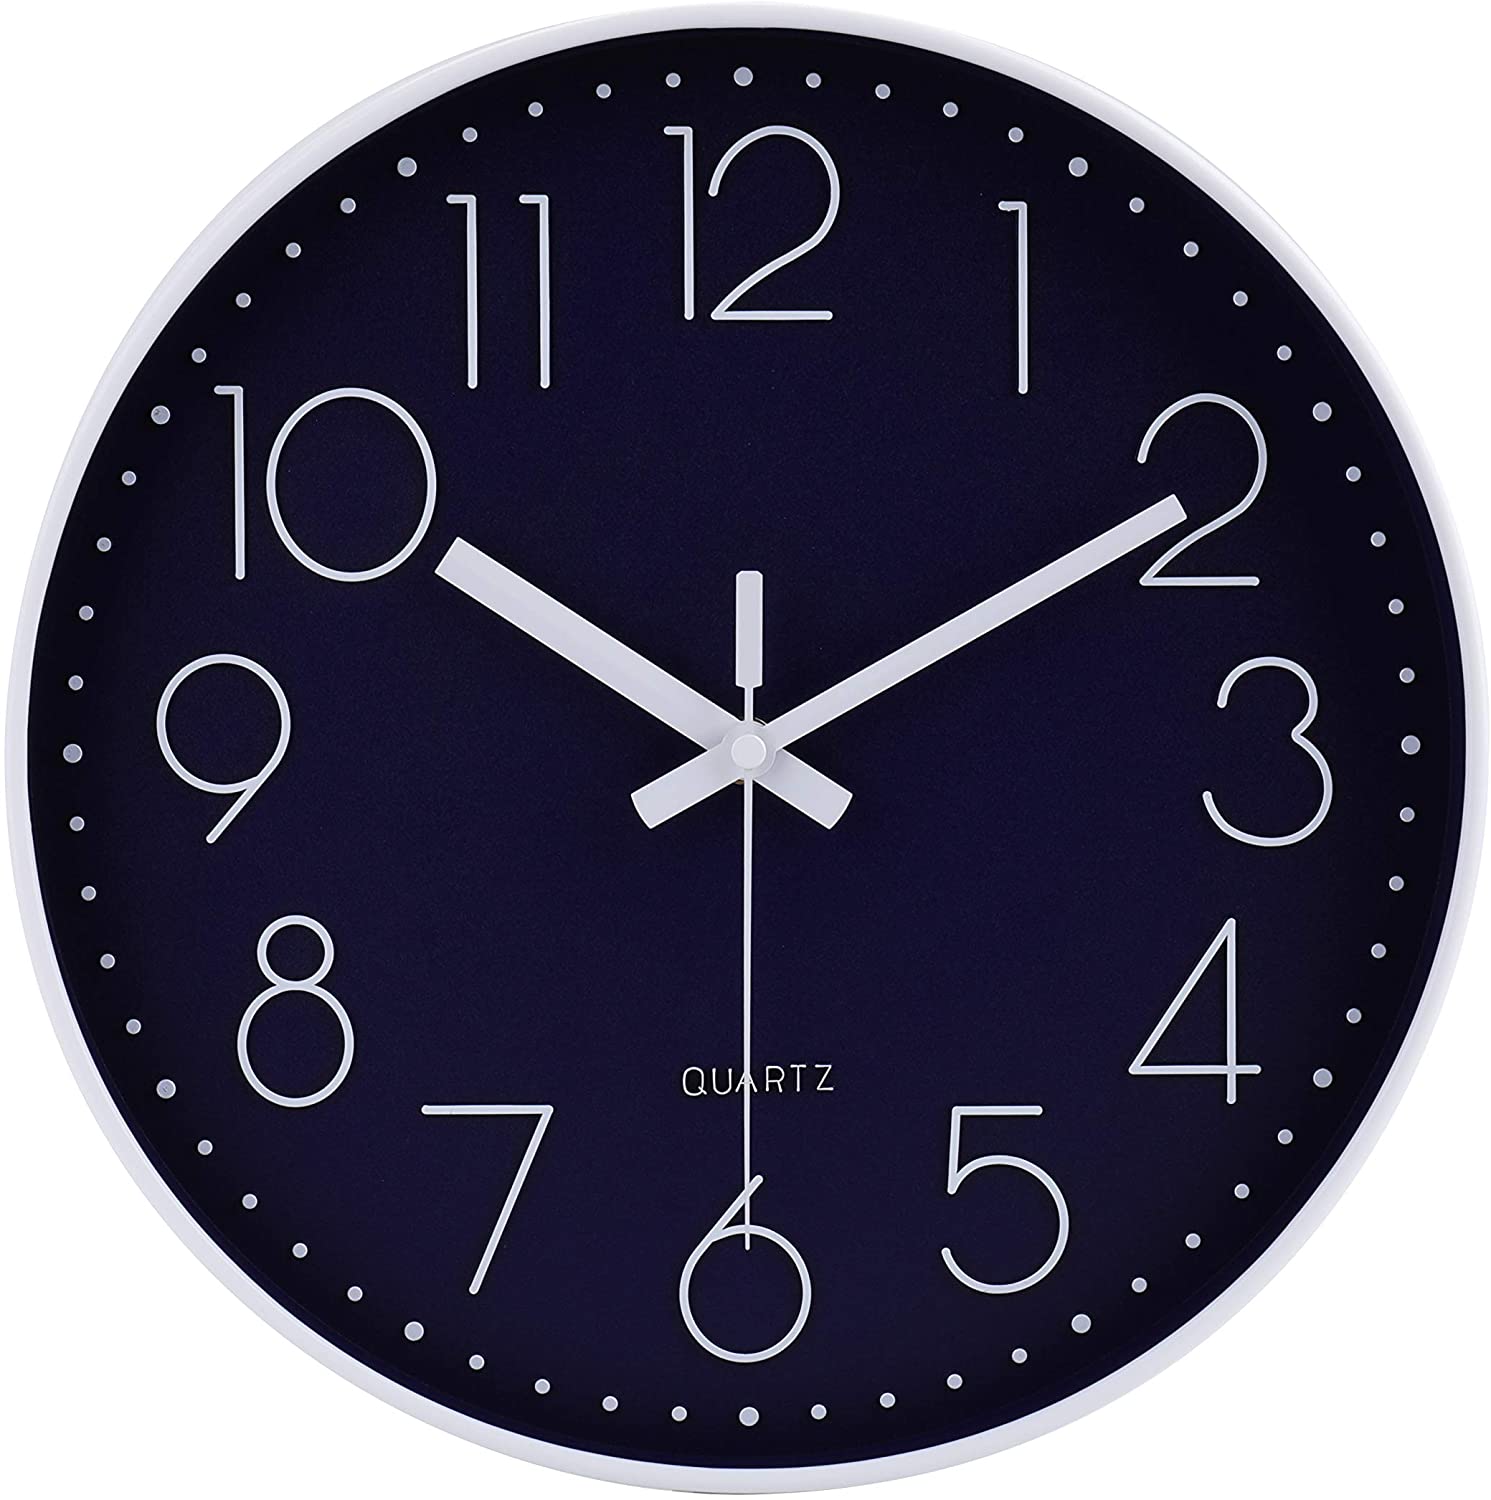 8138-12-navy 12 Inch Silent Non-Ticking Battery Operated Quality Quartz Round Wall Clock Navy Blue Color Modern Decor Clock for Home Office Bedroom Classroom(Navy)